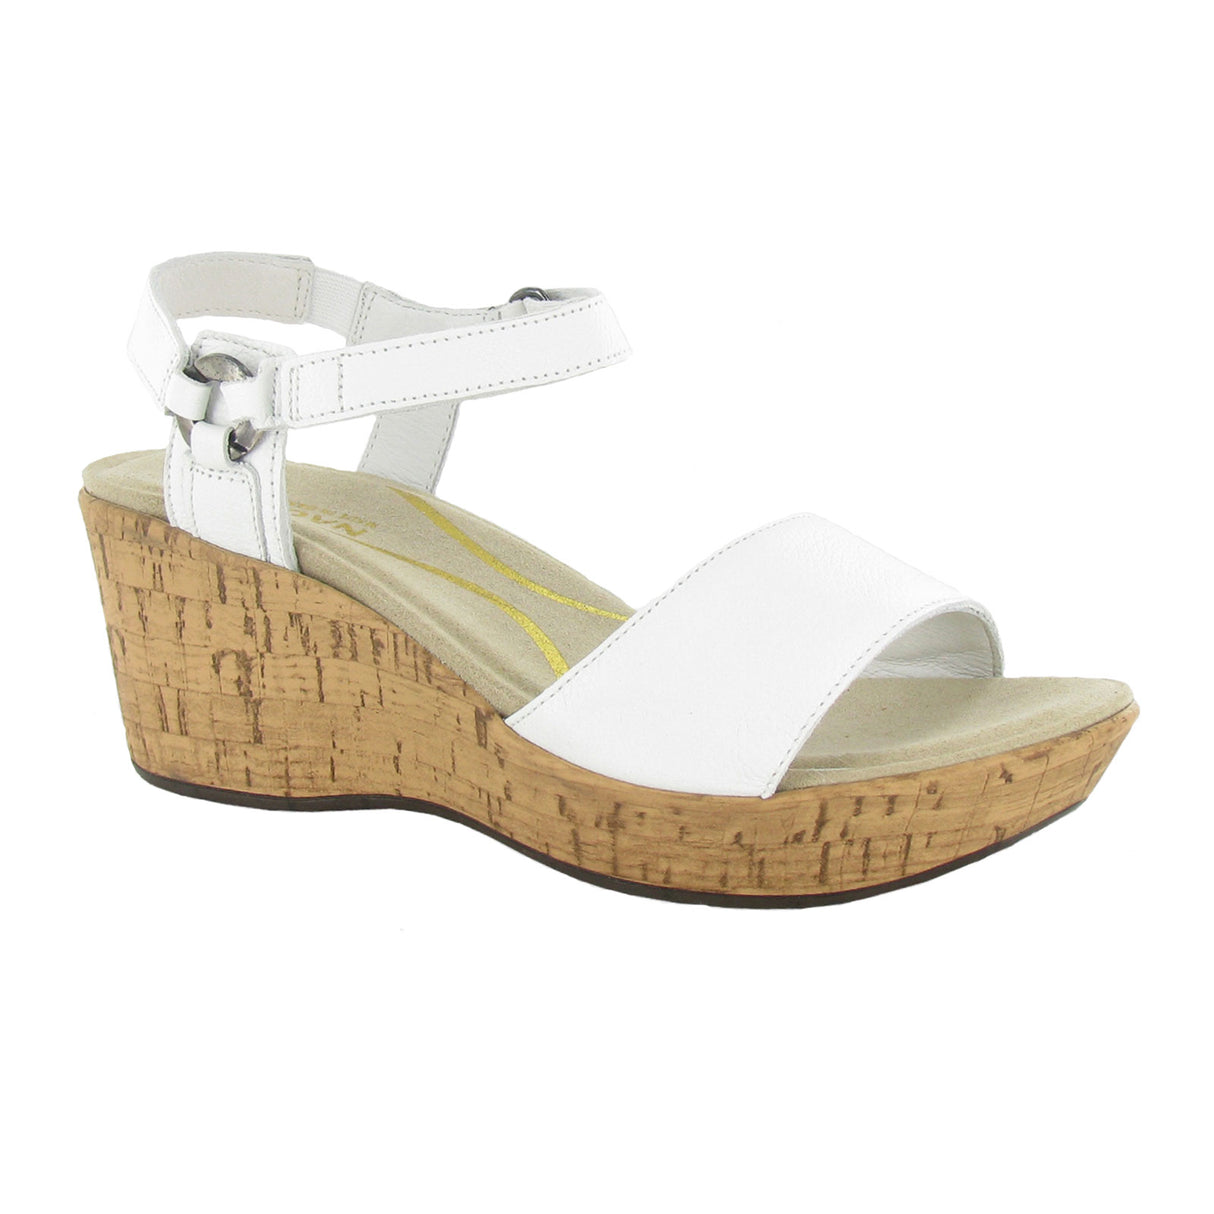 Naot Pier Wedge Sandal (Women) - Soft White Leather Sandals - Heel/Wedge - The Heel Shoe Fitters